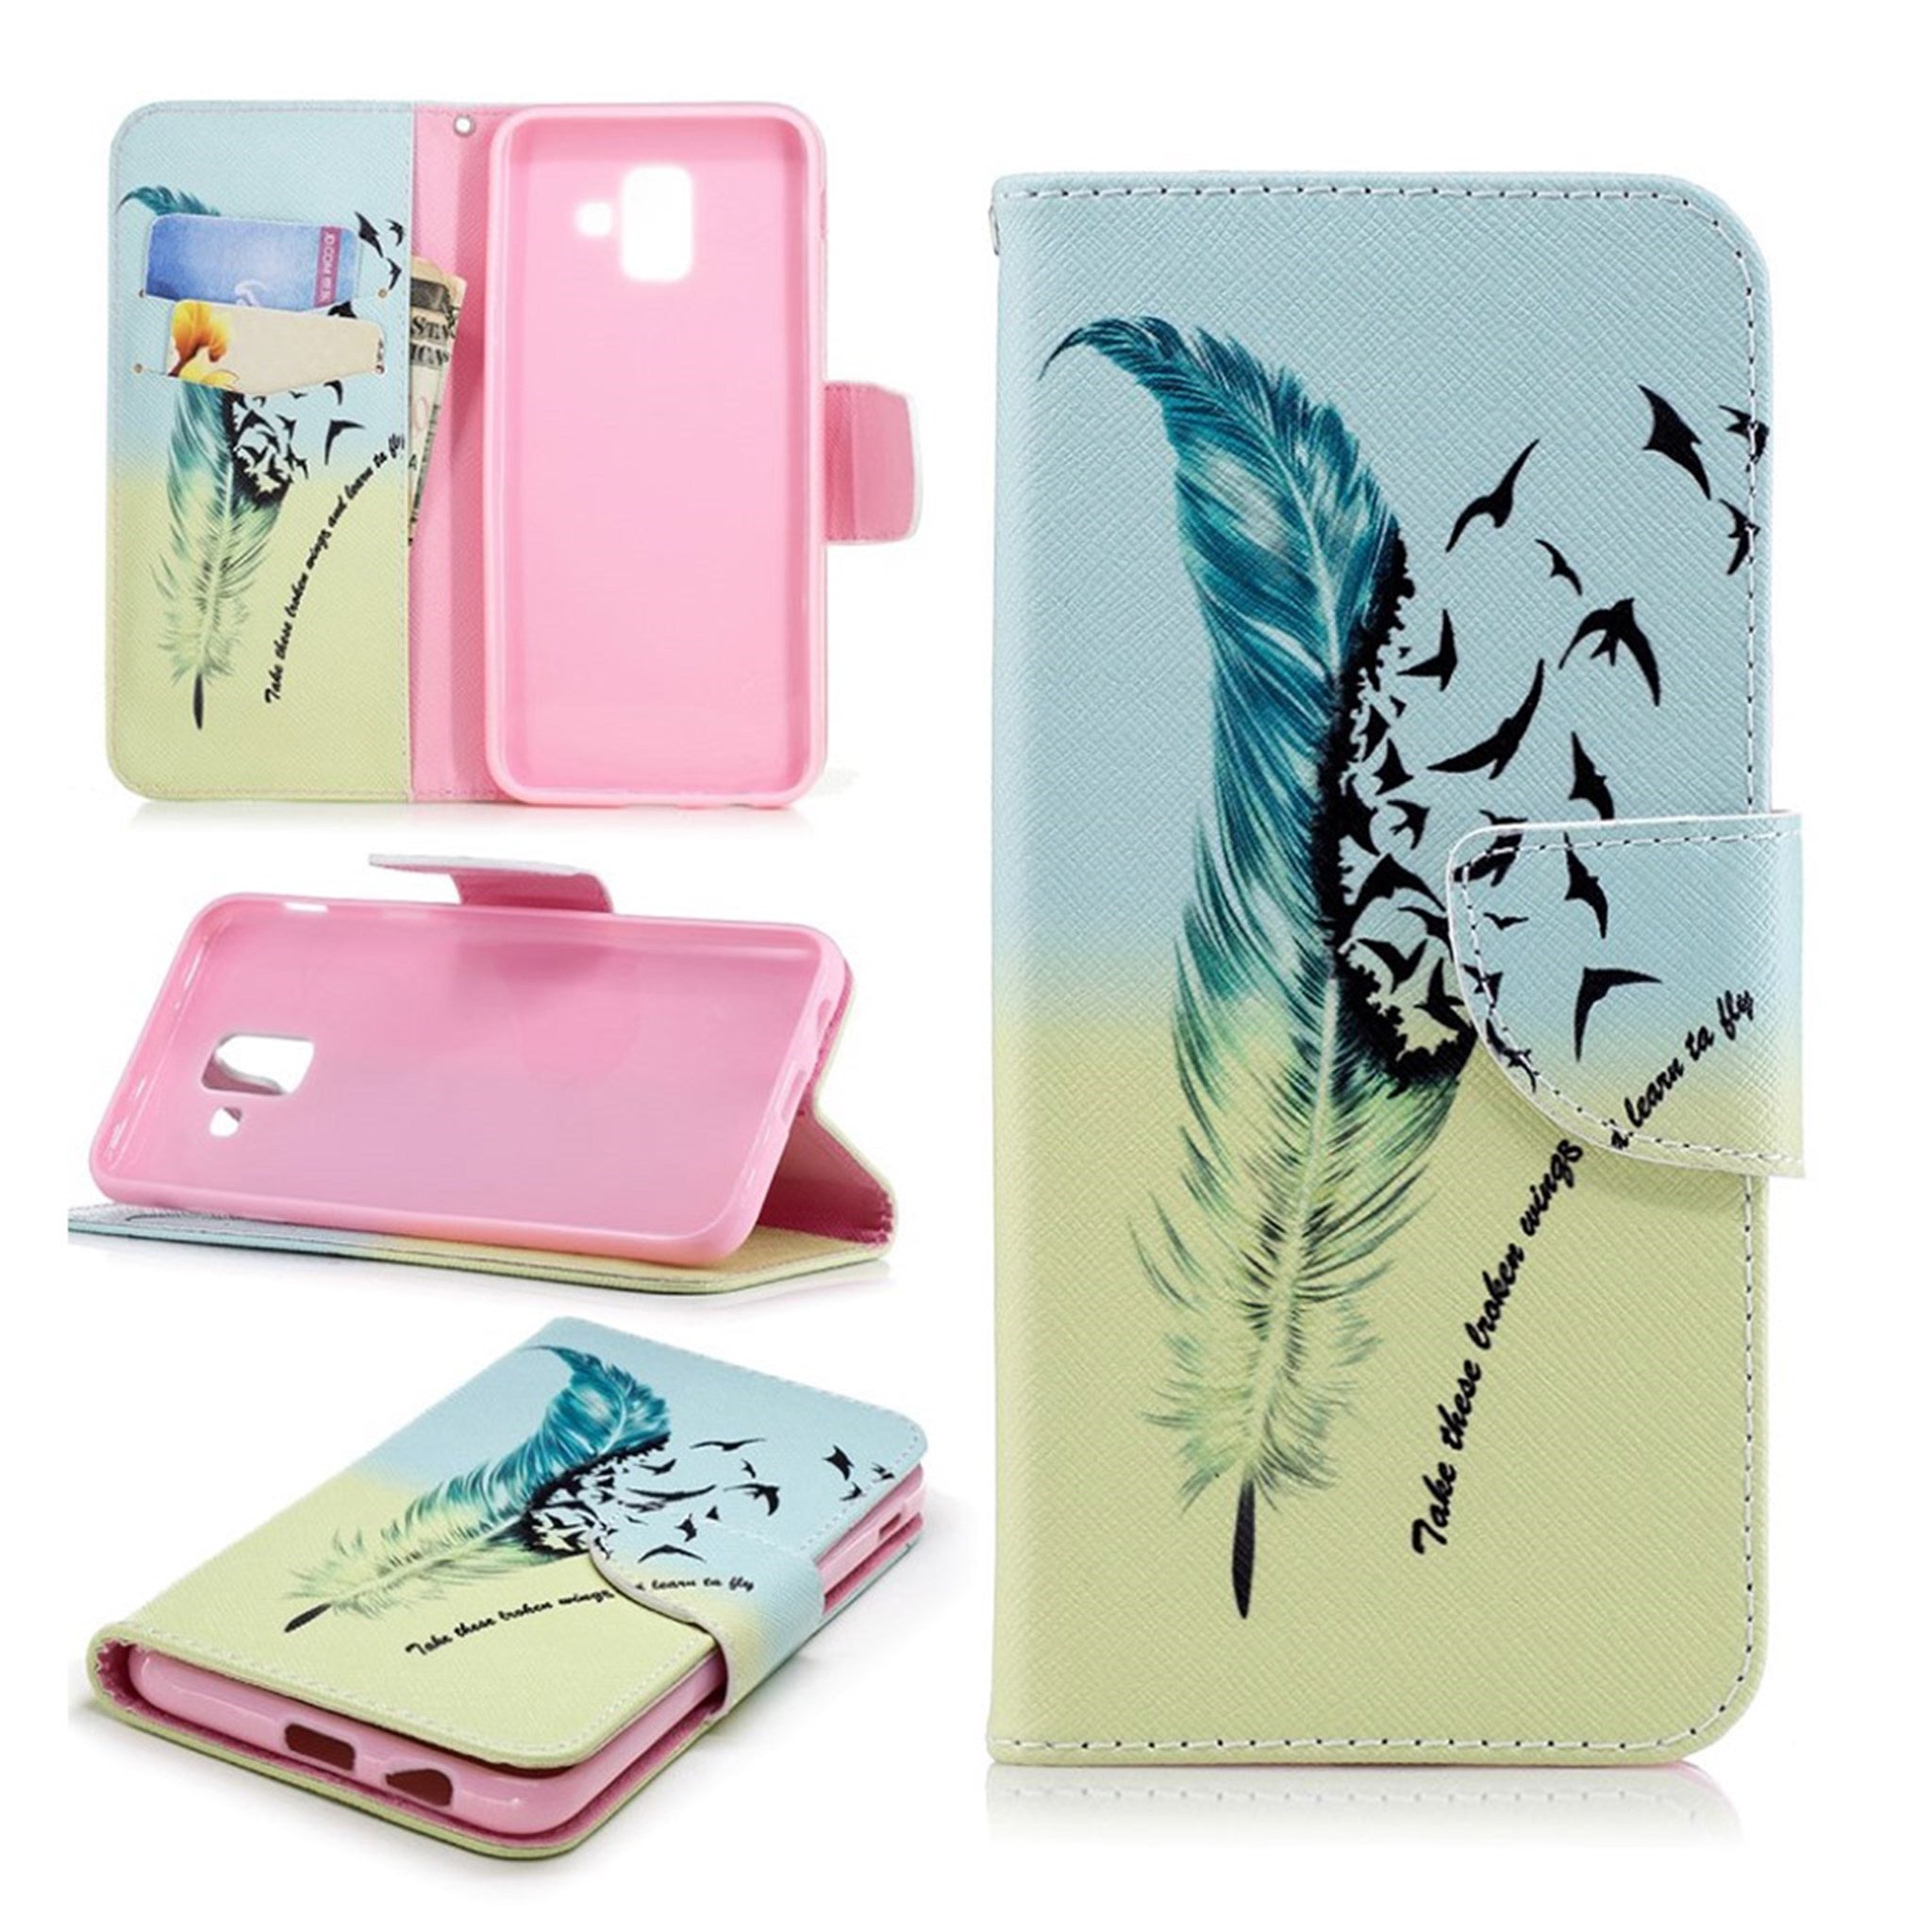 Samsung Galaxy A6 pattern printing leather flip case - Quill Pen and Birds